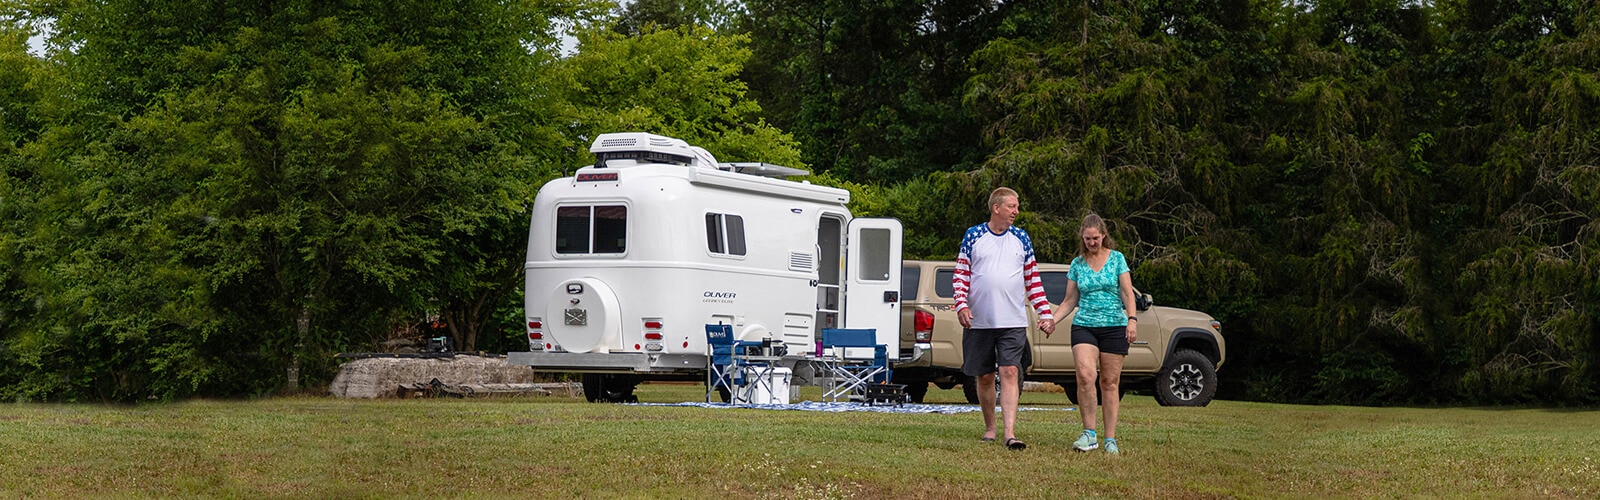 14 Things You Need To Consider When Caring for Your Travel Trailer